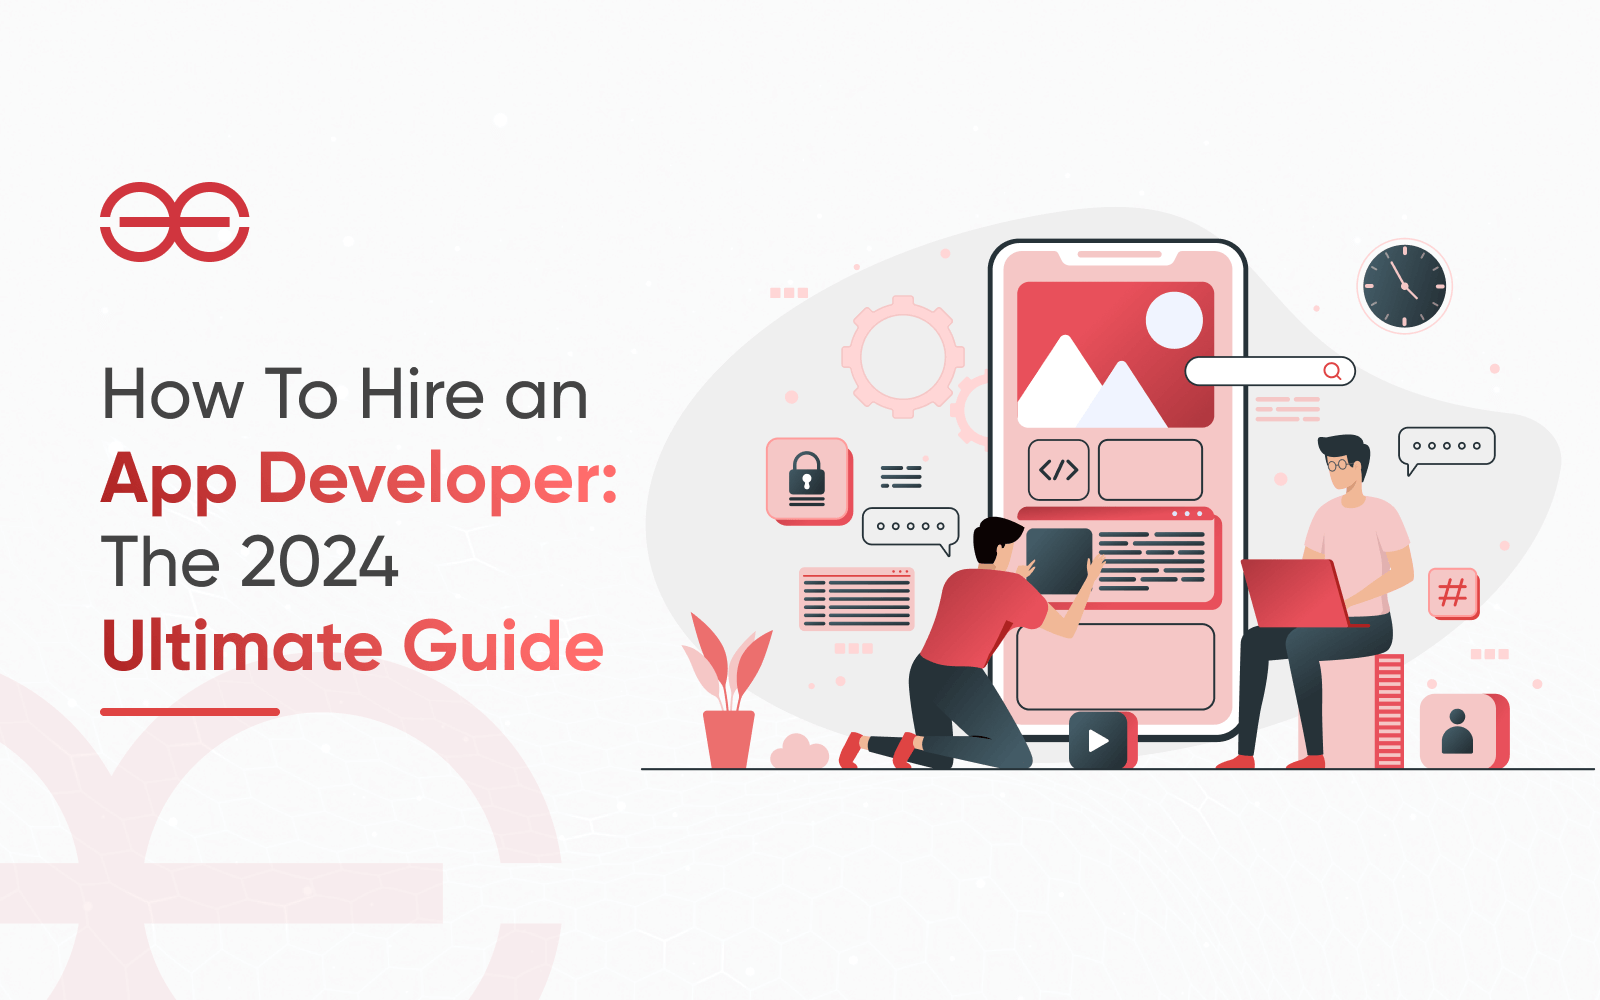 how-to-hire-an-app-developer-the-2024-ultimate-guide.